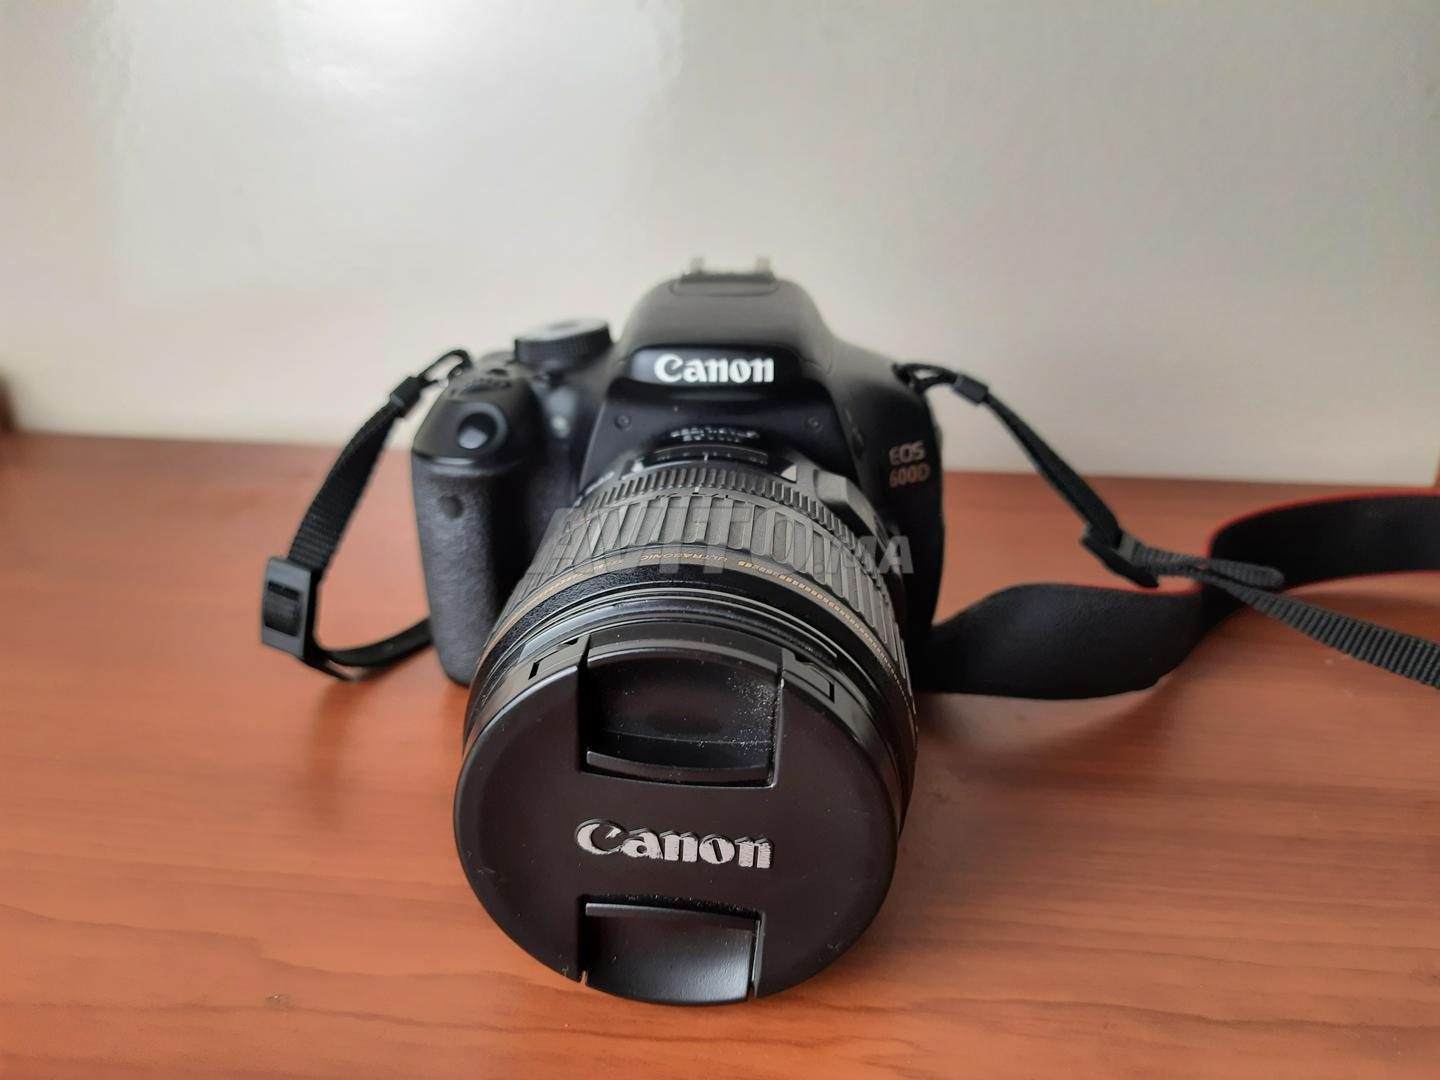 Canon eos 600d 17-85mm 50mm - 4